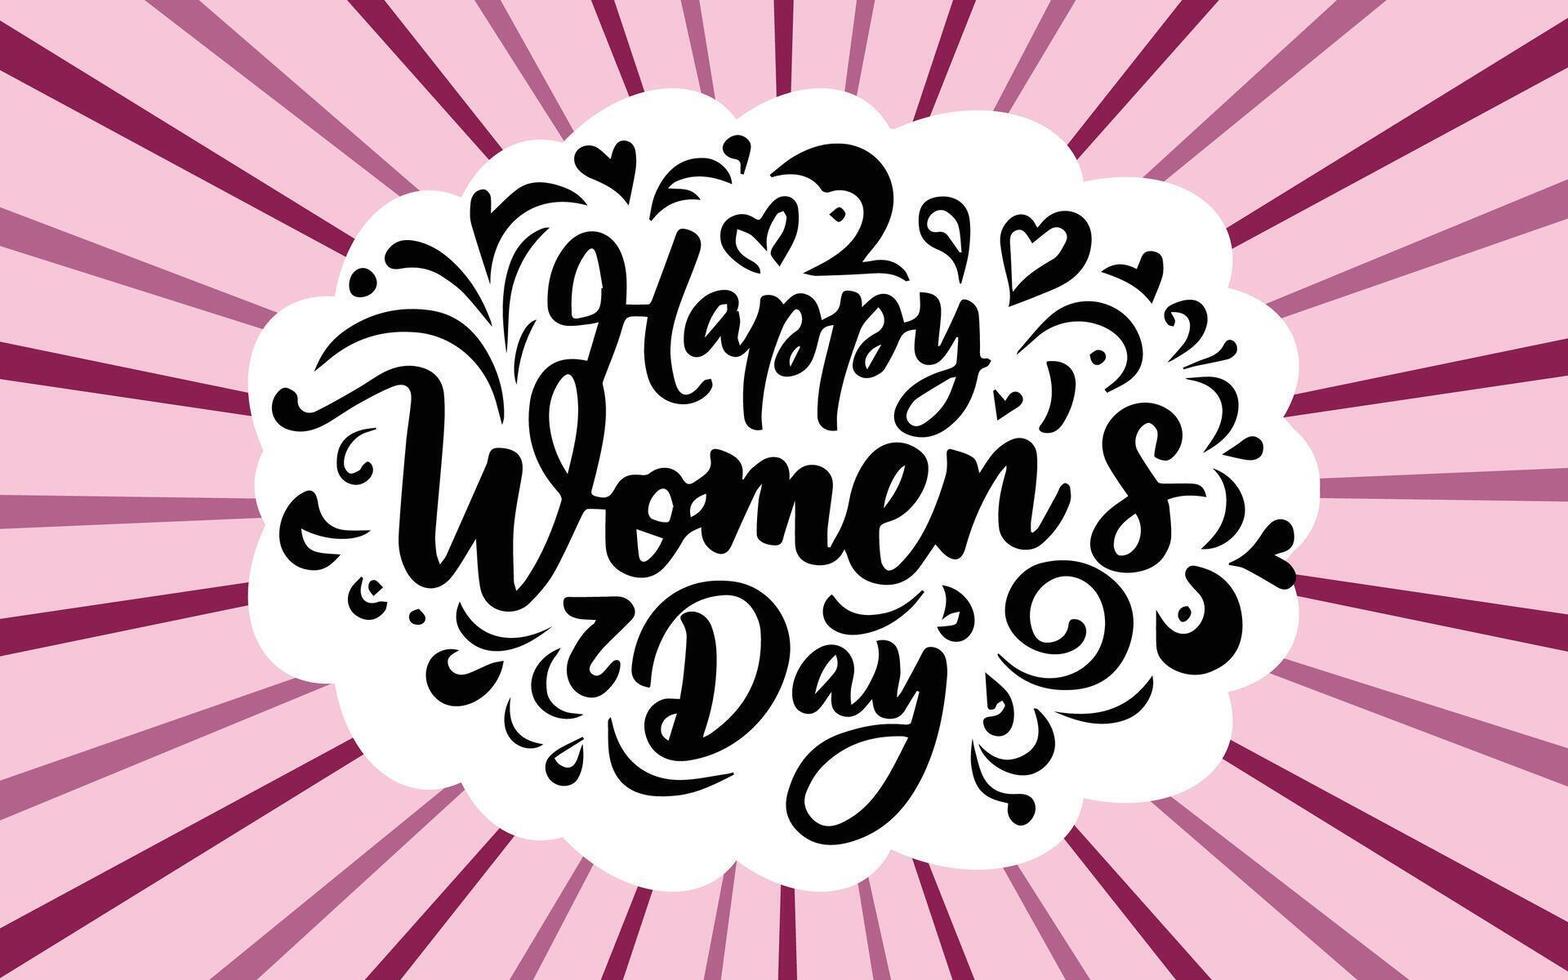 Happy Women's Day hand lettering calligraphy text design card stock illustration vector